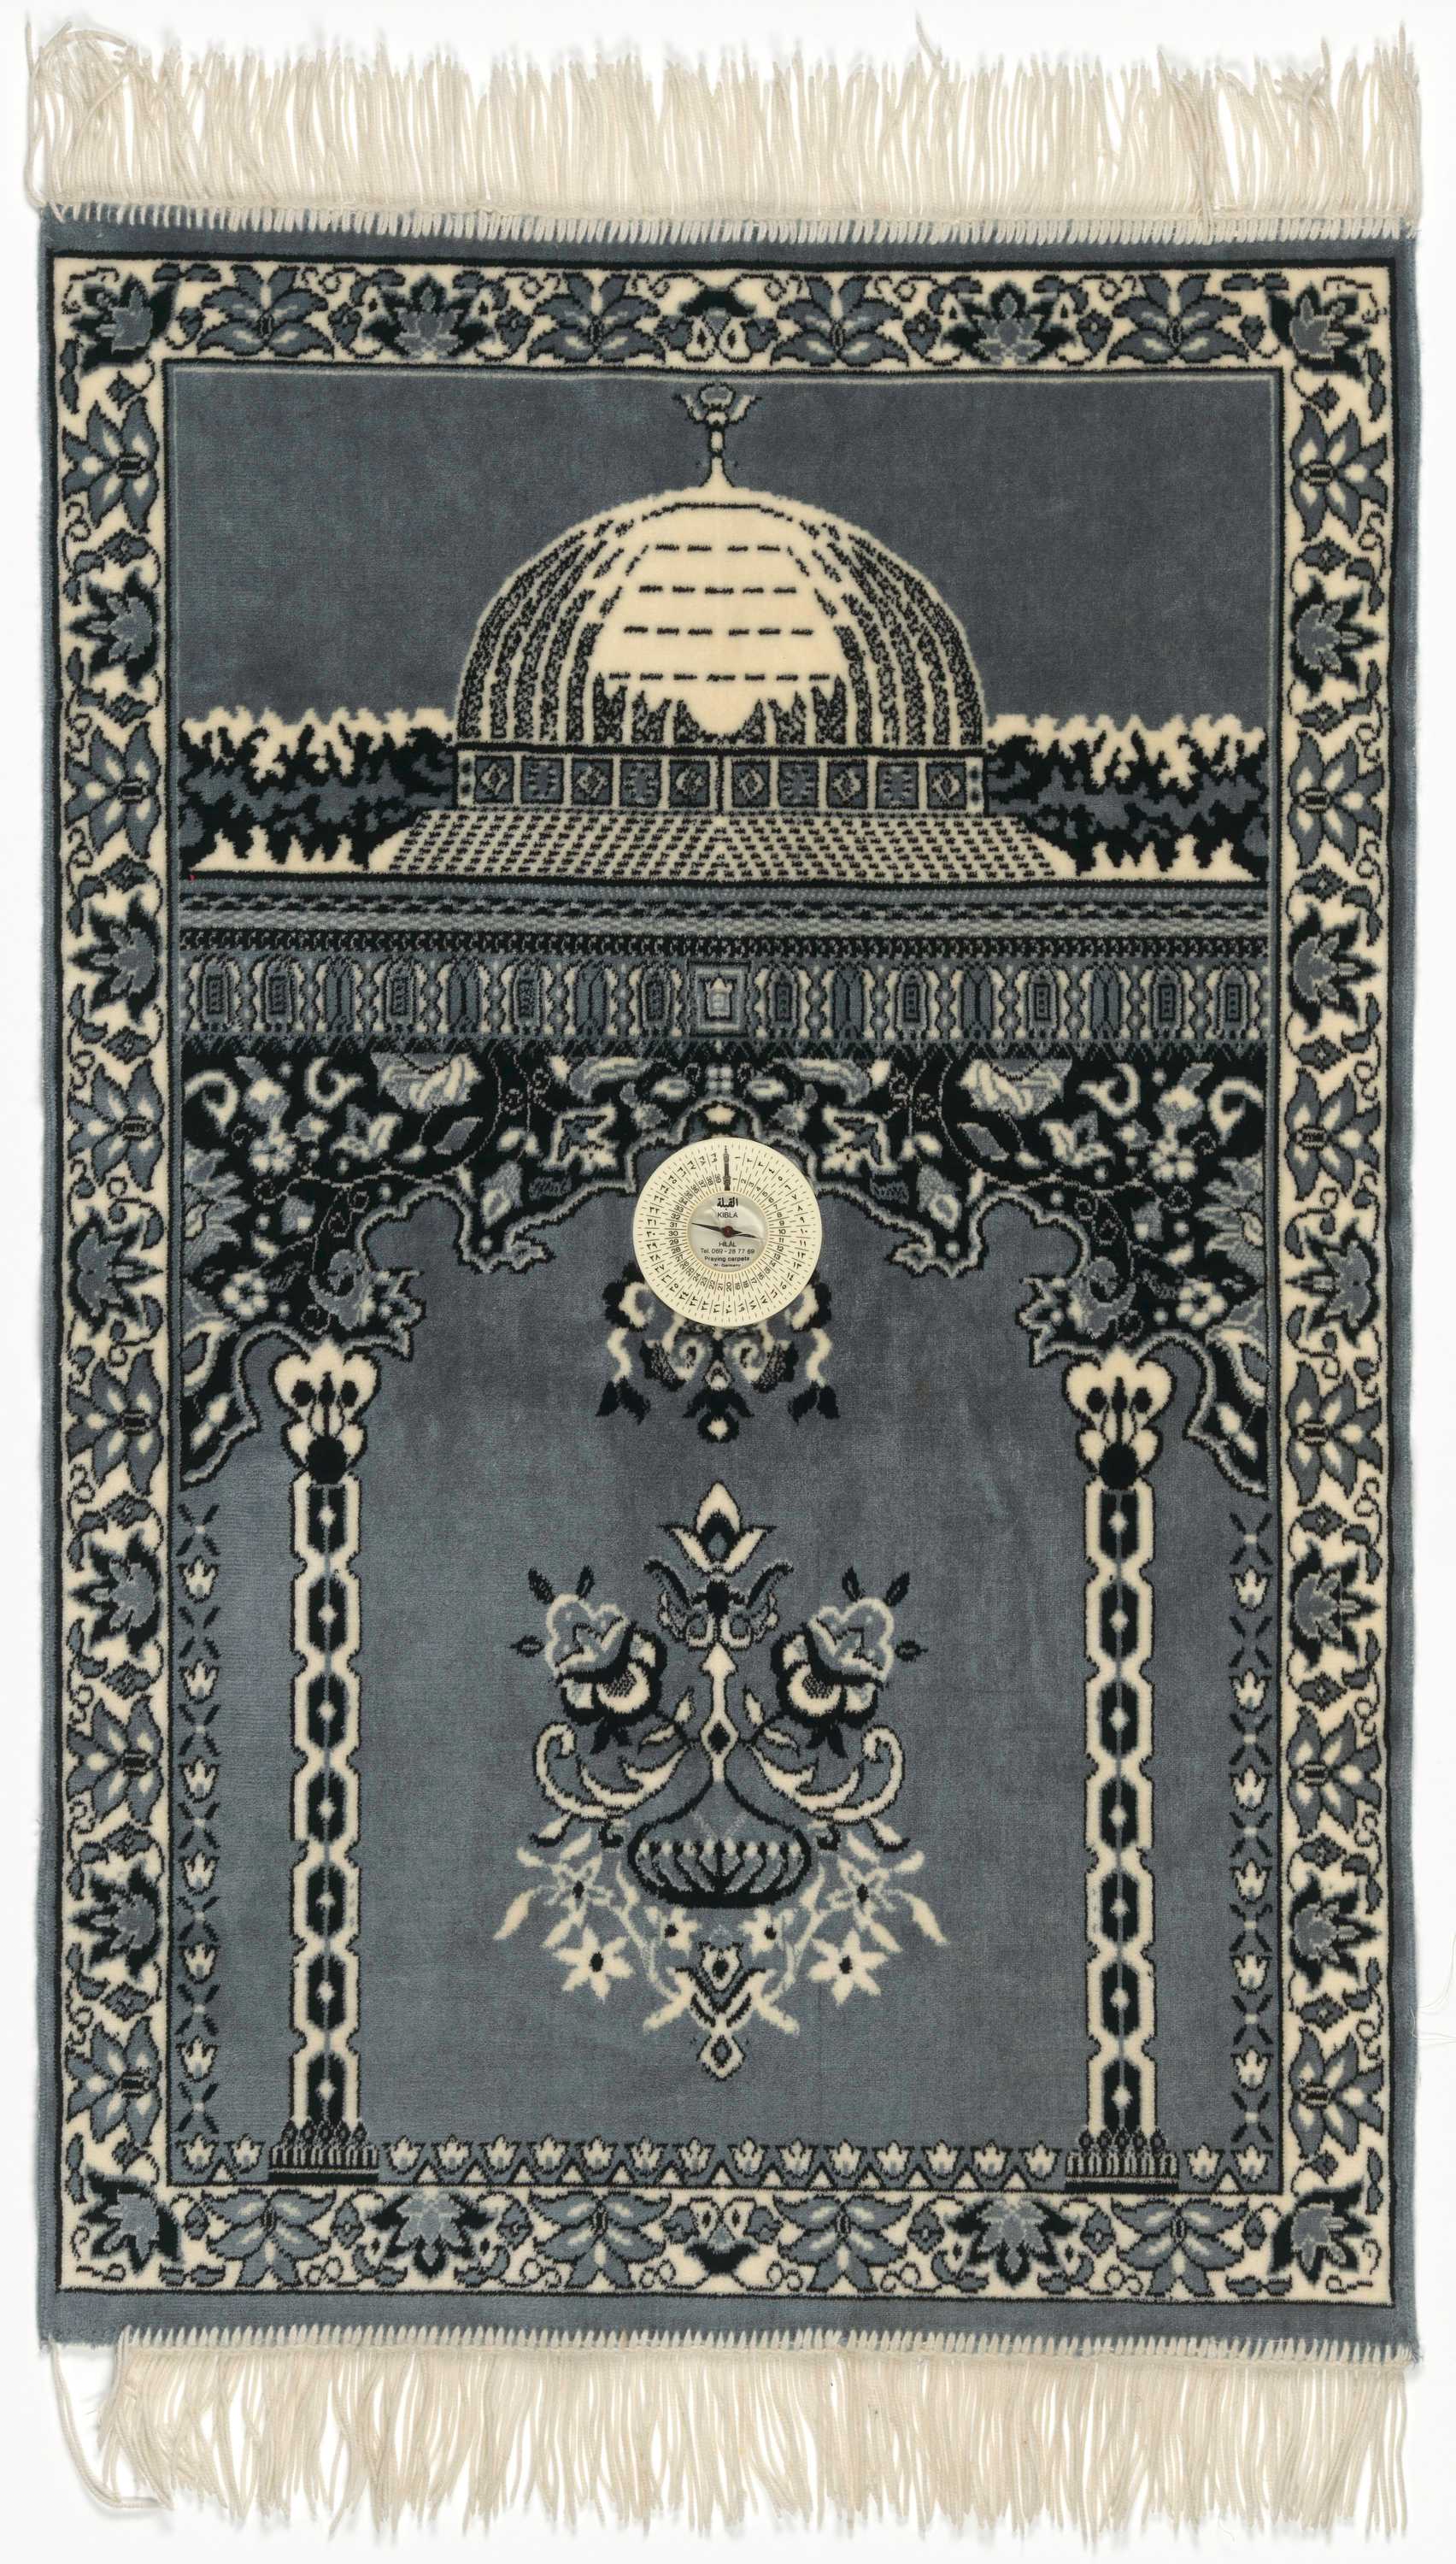 The prayer rug is a low-pile carpet with a primarily gray-blue background with black and white design details. The design featured in the top third of the rug is the image of an architectural dome with a small floral spire at the top. Below the dome is a geometric pattern running horizontally across the rug. Below the geometric pattern in the lower two-thirds of the rug is a stylized architectural interior with geometric columns on either side of the space. At the top of the columns is a stylized arch of floral and scalloped patterns. At the top of the arch, attached to the rug, is a white plastic compass. The compass is a Qibla directional compass. Below the compass needle, at the bottom, is the manufacturer information [HILAL / Tel. 069-28 77 69 / Praying carpets / W.-Germany]. Below the compass, in the center, is a floral motif. Surrounding the edges of the rug is a border with a floral pattern. At the top and bottom of the rug is white fringe.